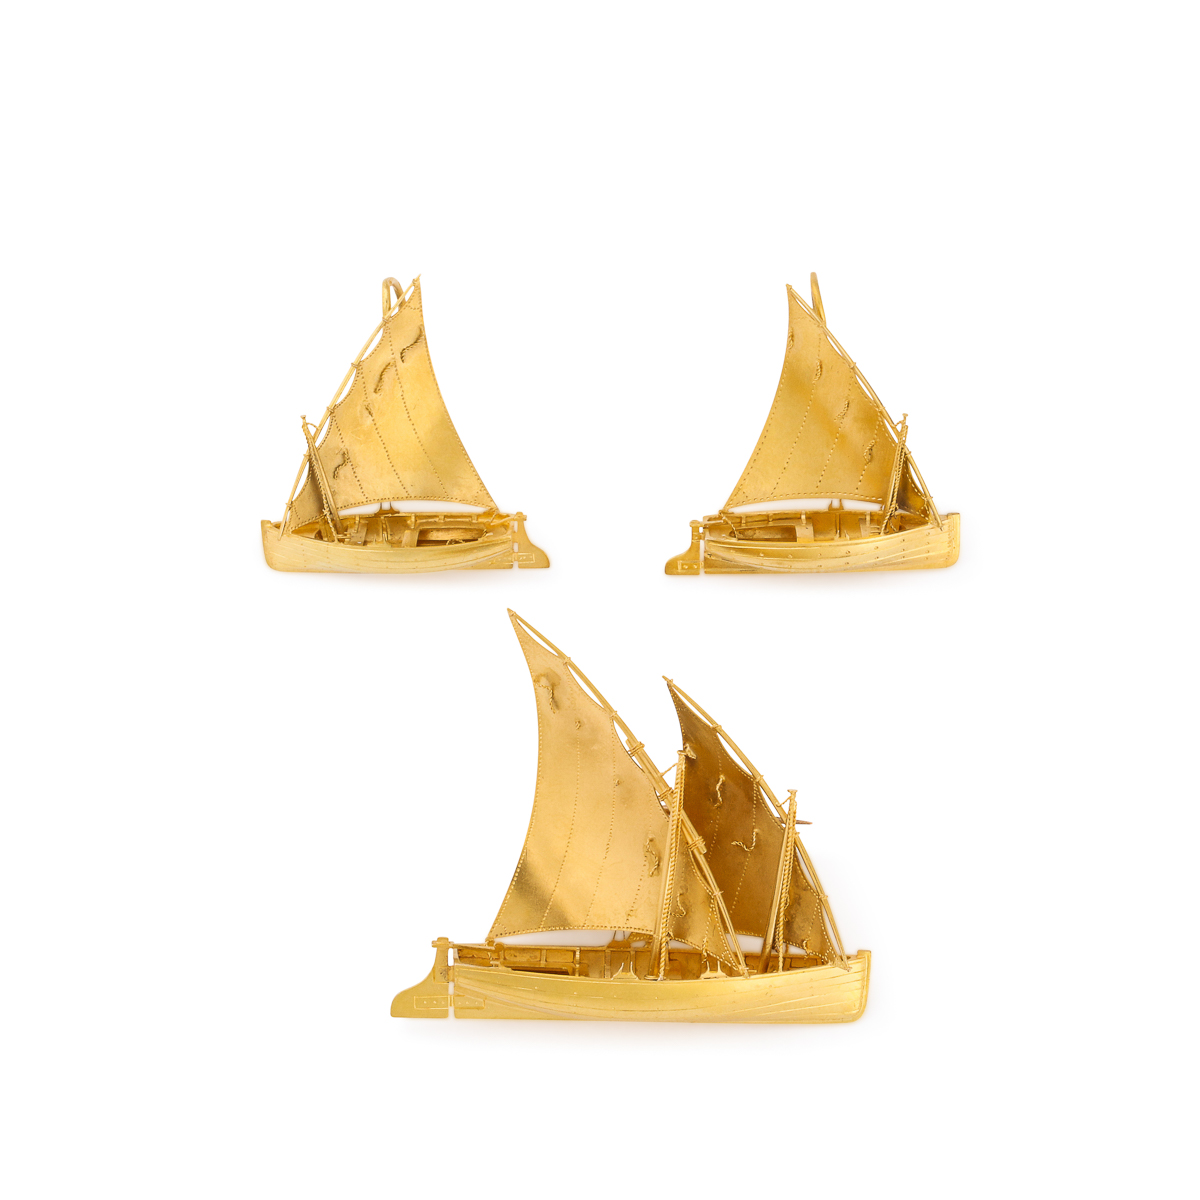 group shot of Antique Gold Sailboat Brooch and Earrings